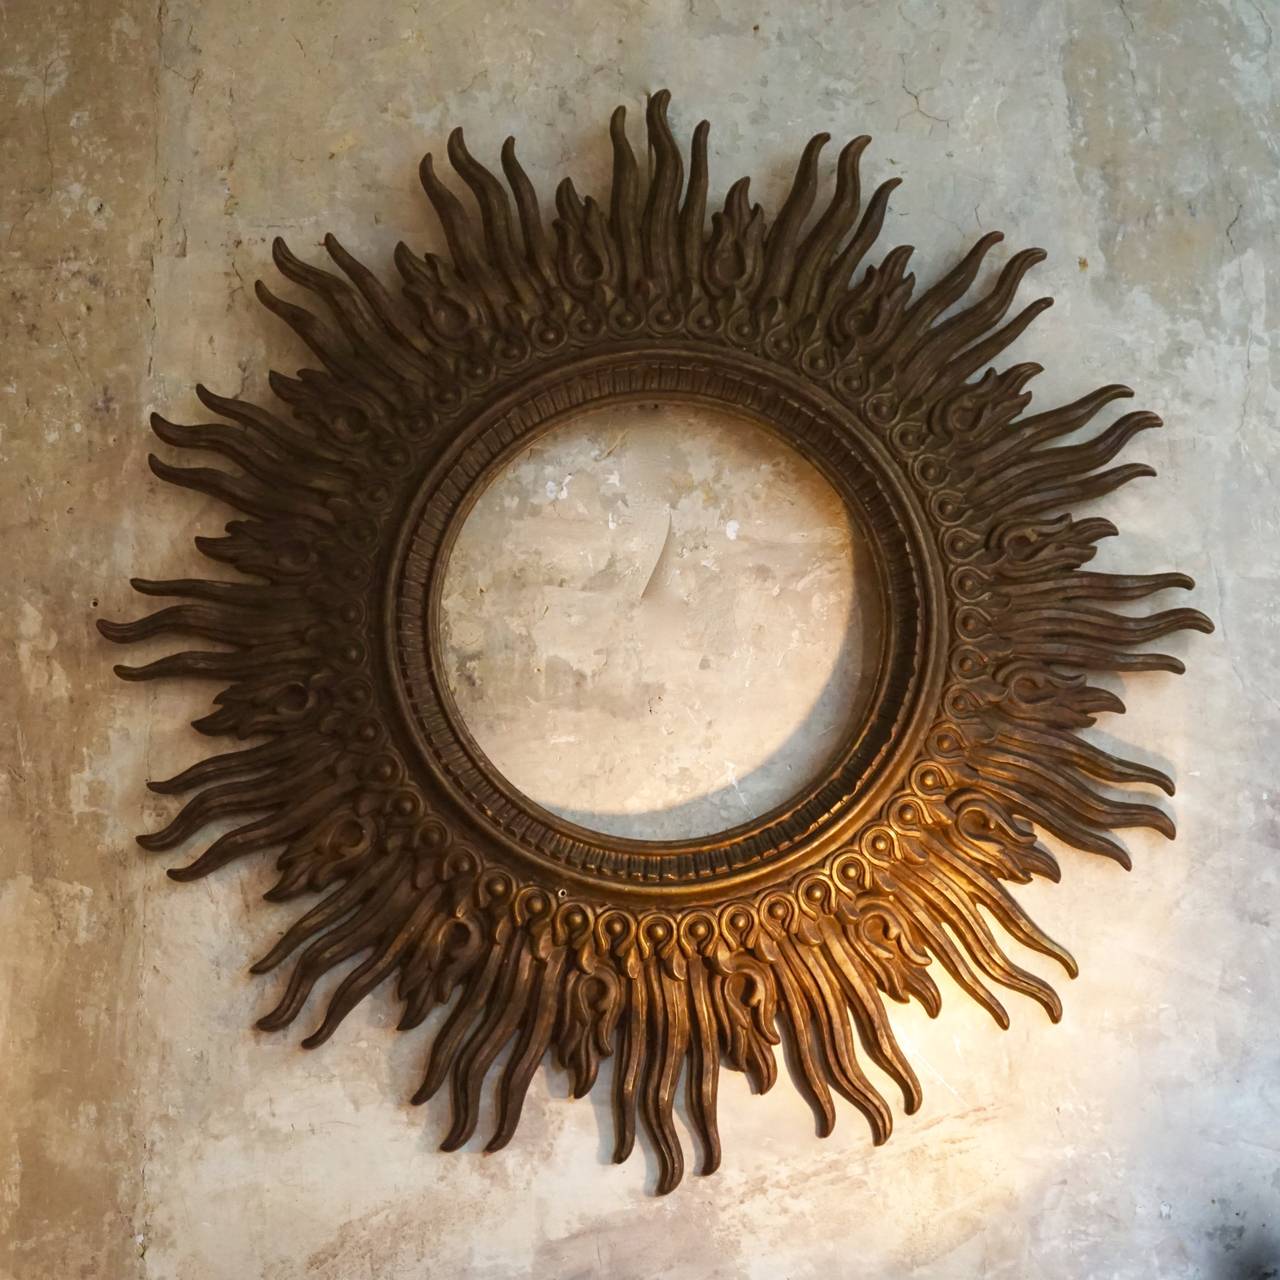 Beautiful mid century sunburst mirror.
Total diameter 120 cm.
Mirror diameter 48 cm
It can also be used as a photo frame.Only the frame is for sale.